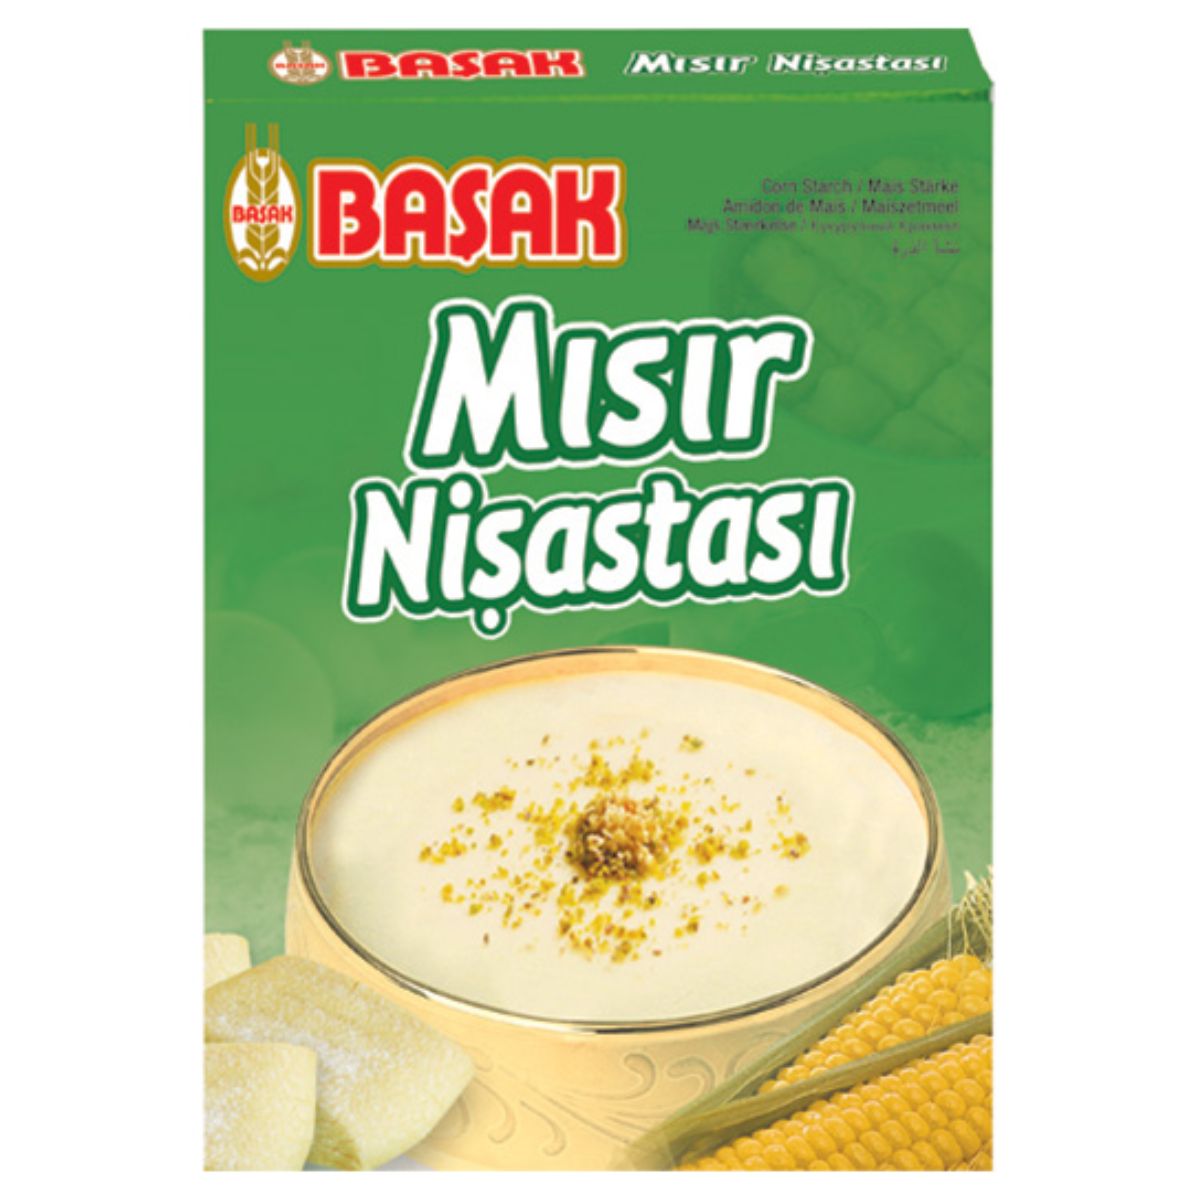 A packaged Basak - Corn Starch (Misir Nisastasi) - 200g product, with an image of a bowl of pudding on the front.